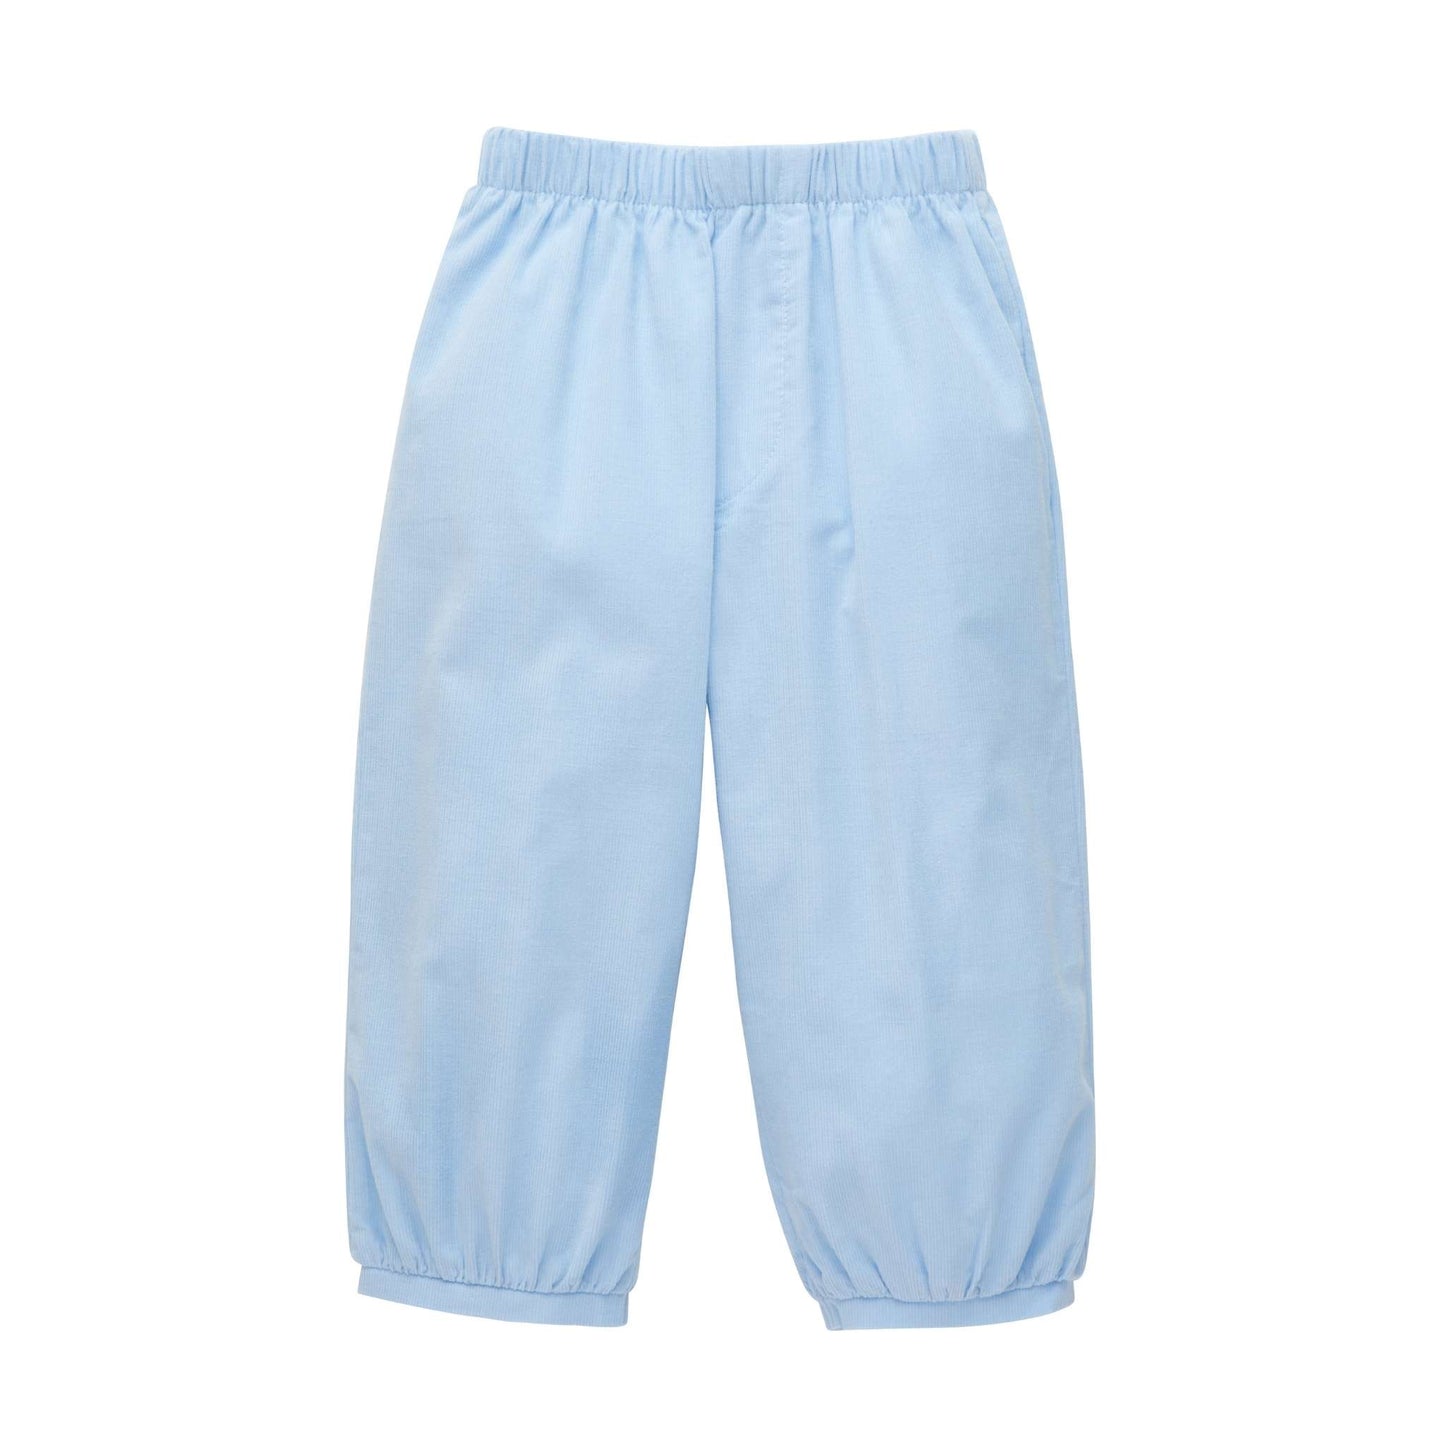 Banded Cord Pull-on Pant